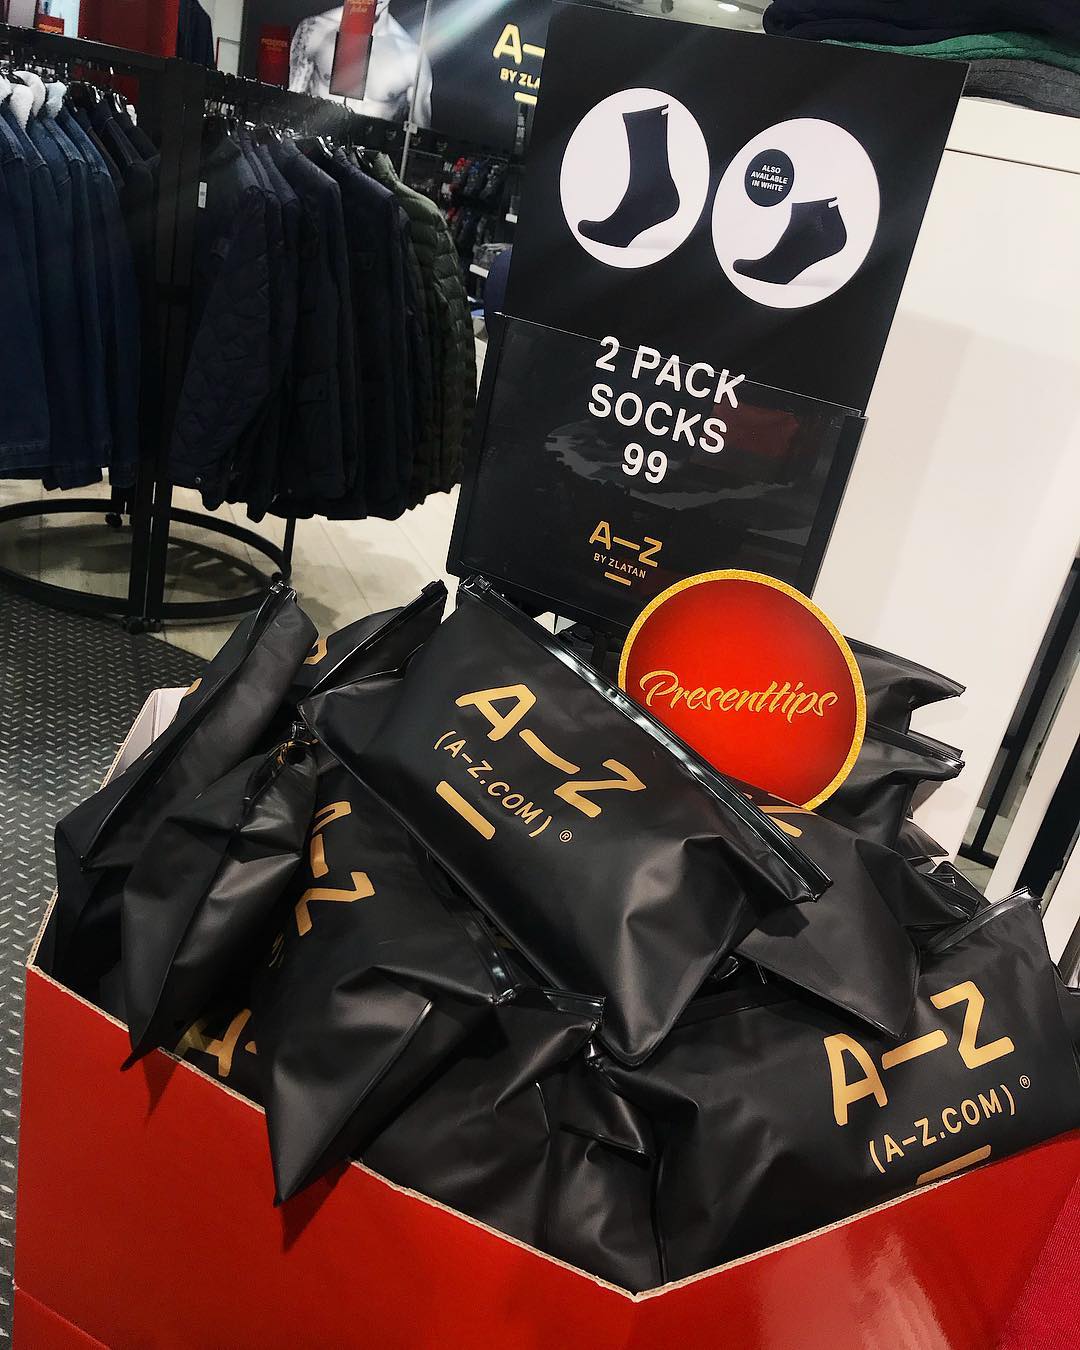 Now we have also got socks in the brand A-Z, even perfect Christmas gifts! #dress …